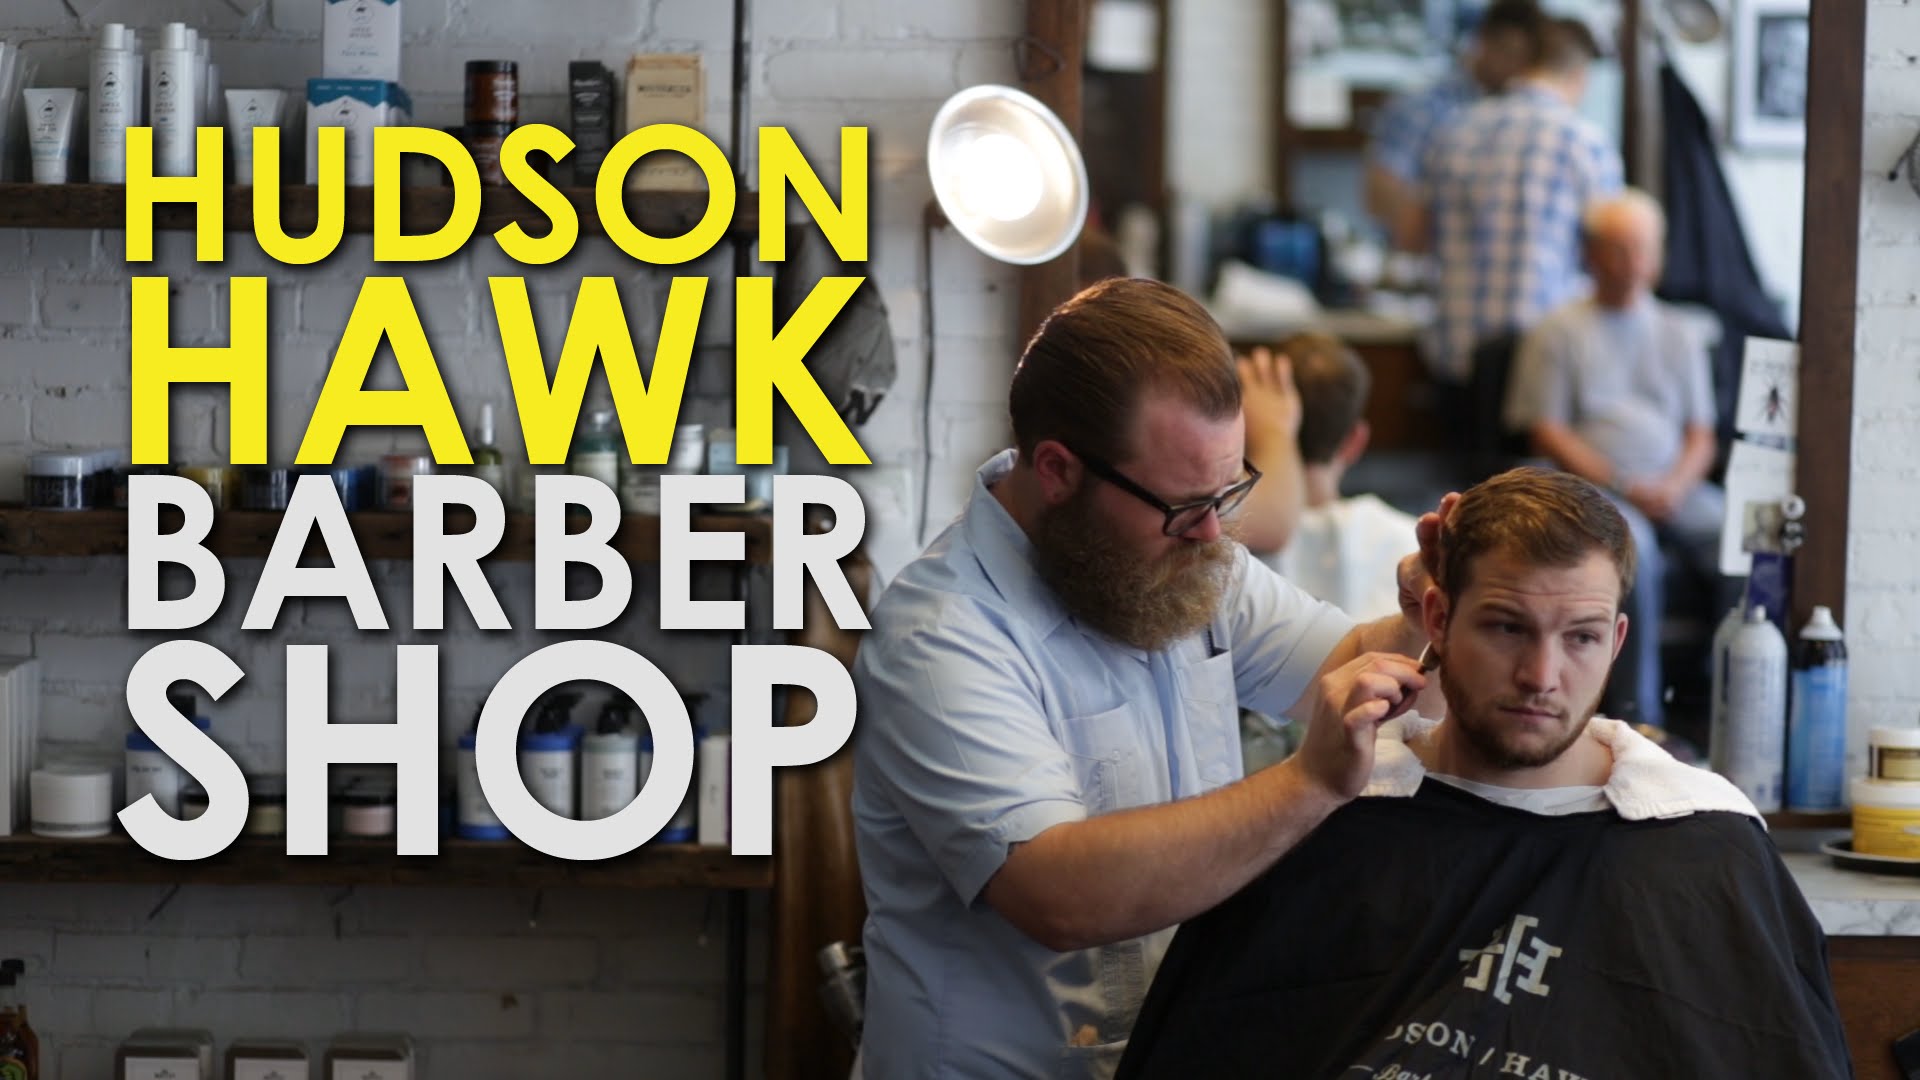 Get a top-notch haircut or shave at the Hudson Hawk barber shop.